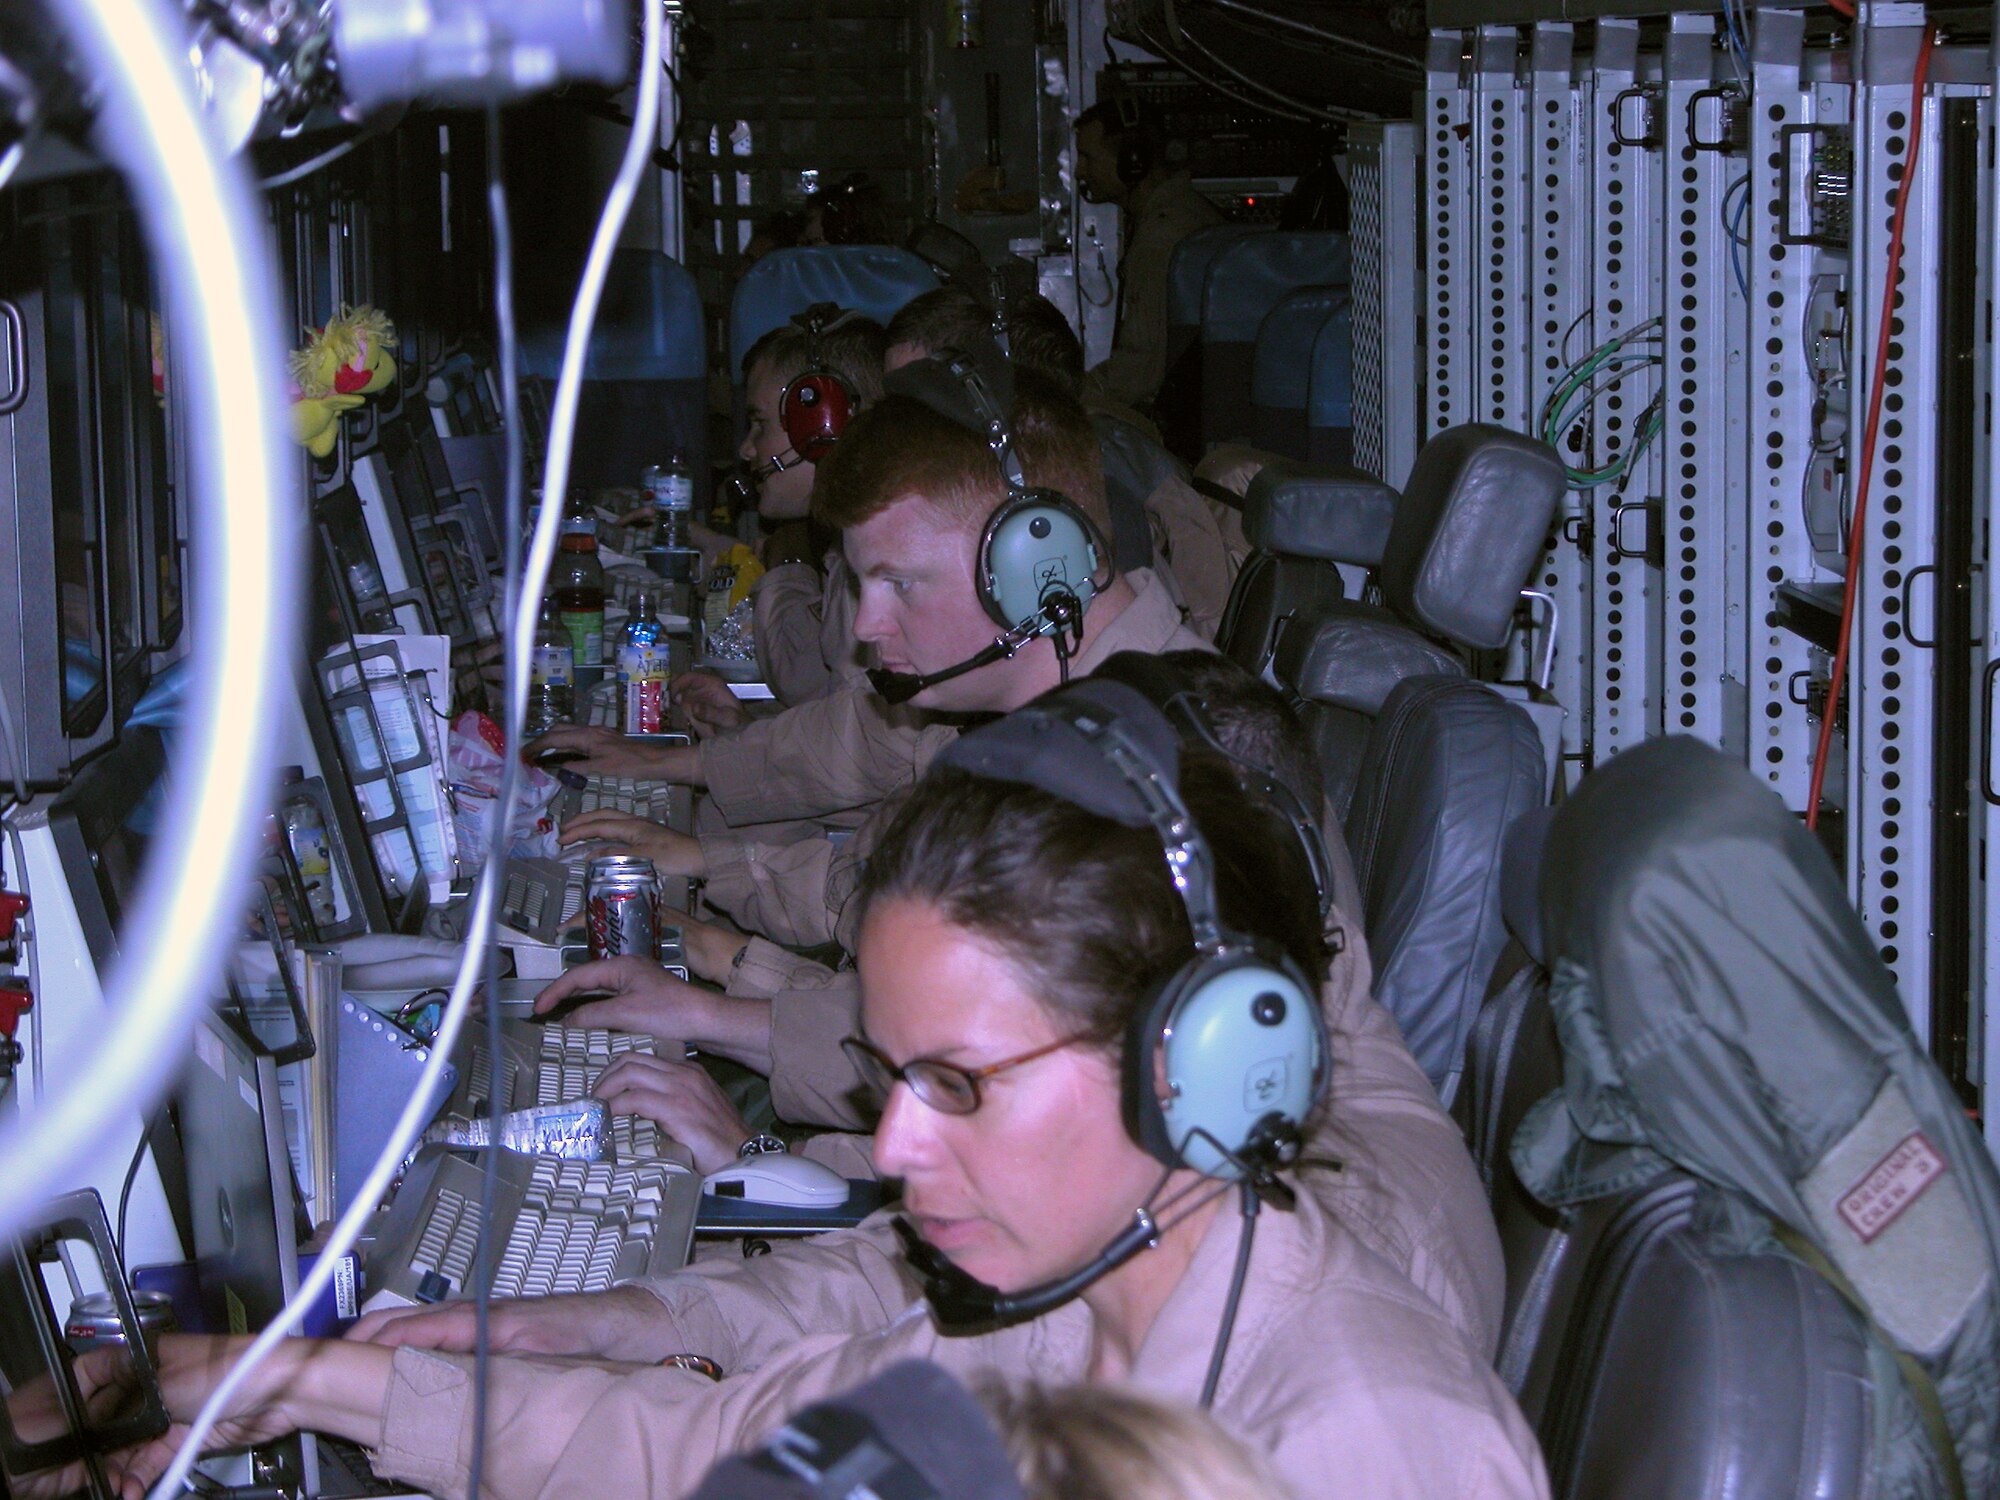 Airmen from the 763rd Expeditionary Reconnaissance Squadron provide real time on-scene intelligence collection, surveillance and analysis to forces in the air and on the ground during a mission in Southwest Asia. (U.S. Air Force photo)